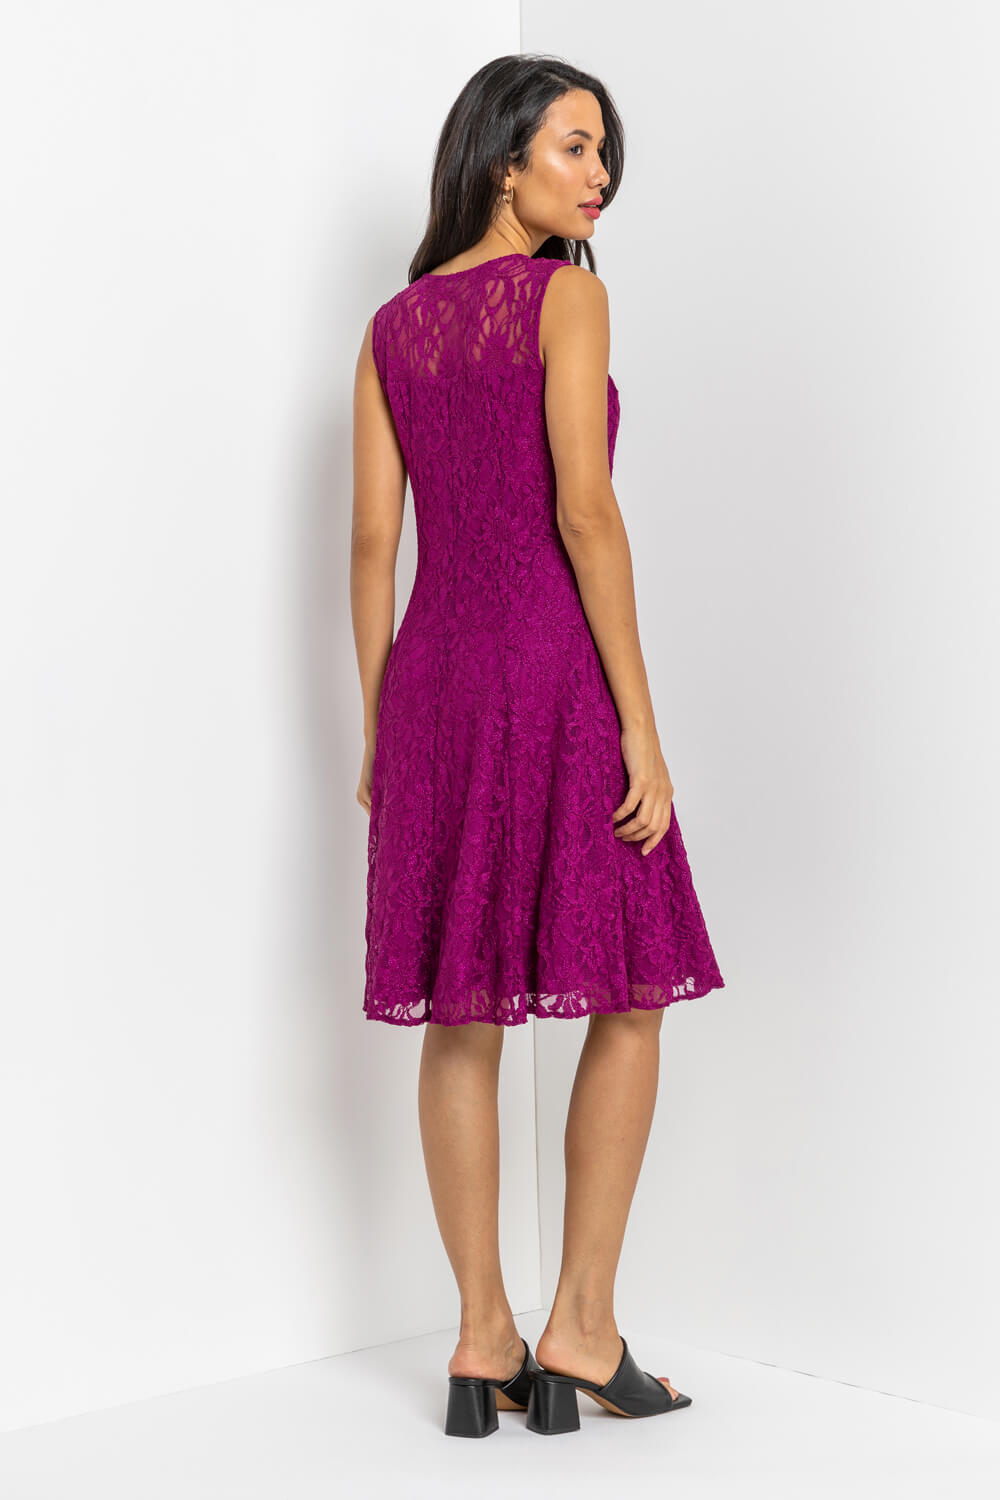 MAGENTA Glitter Lace Fit and Flare Dress , Image 2 of 4